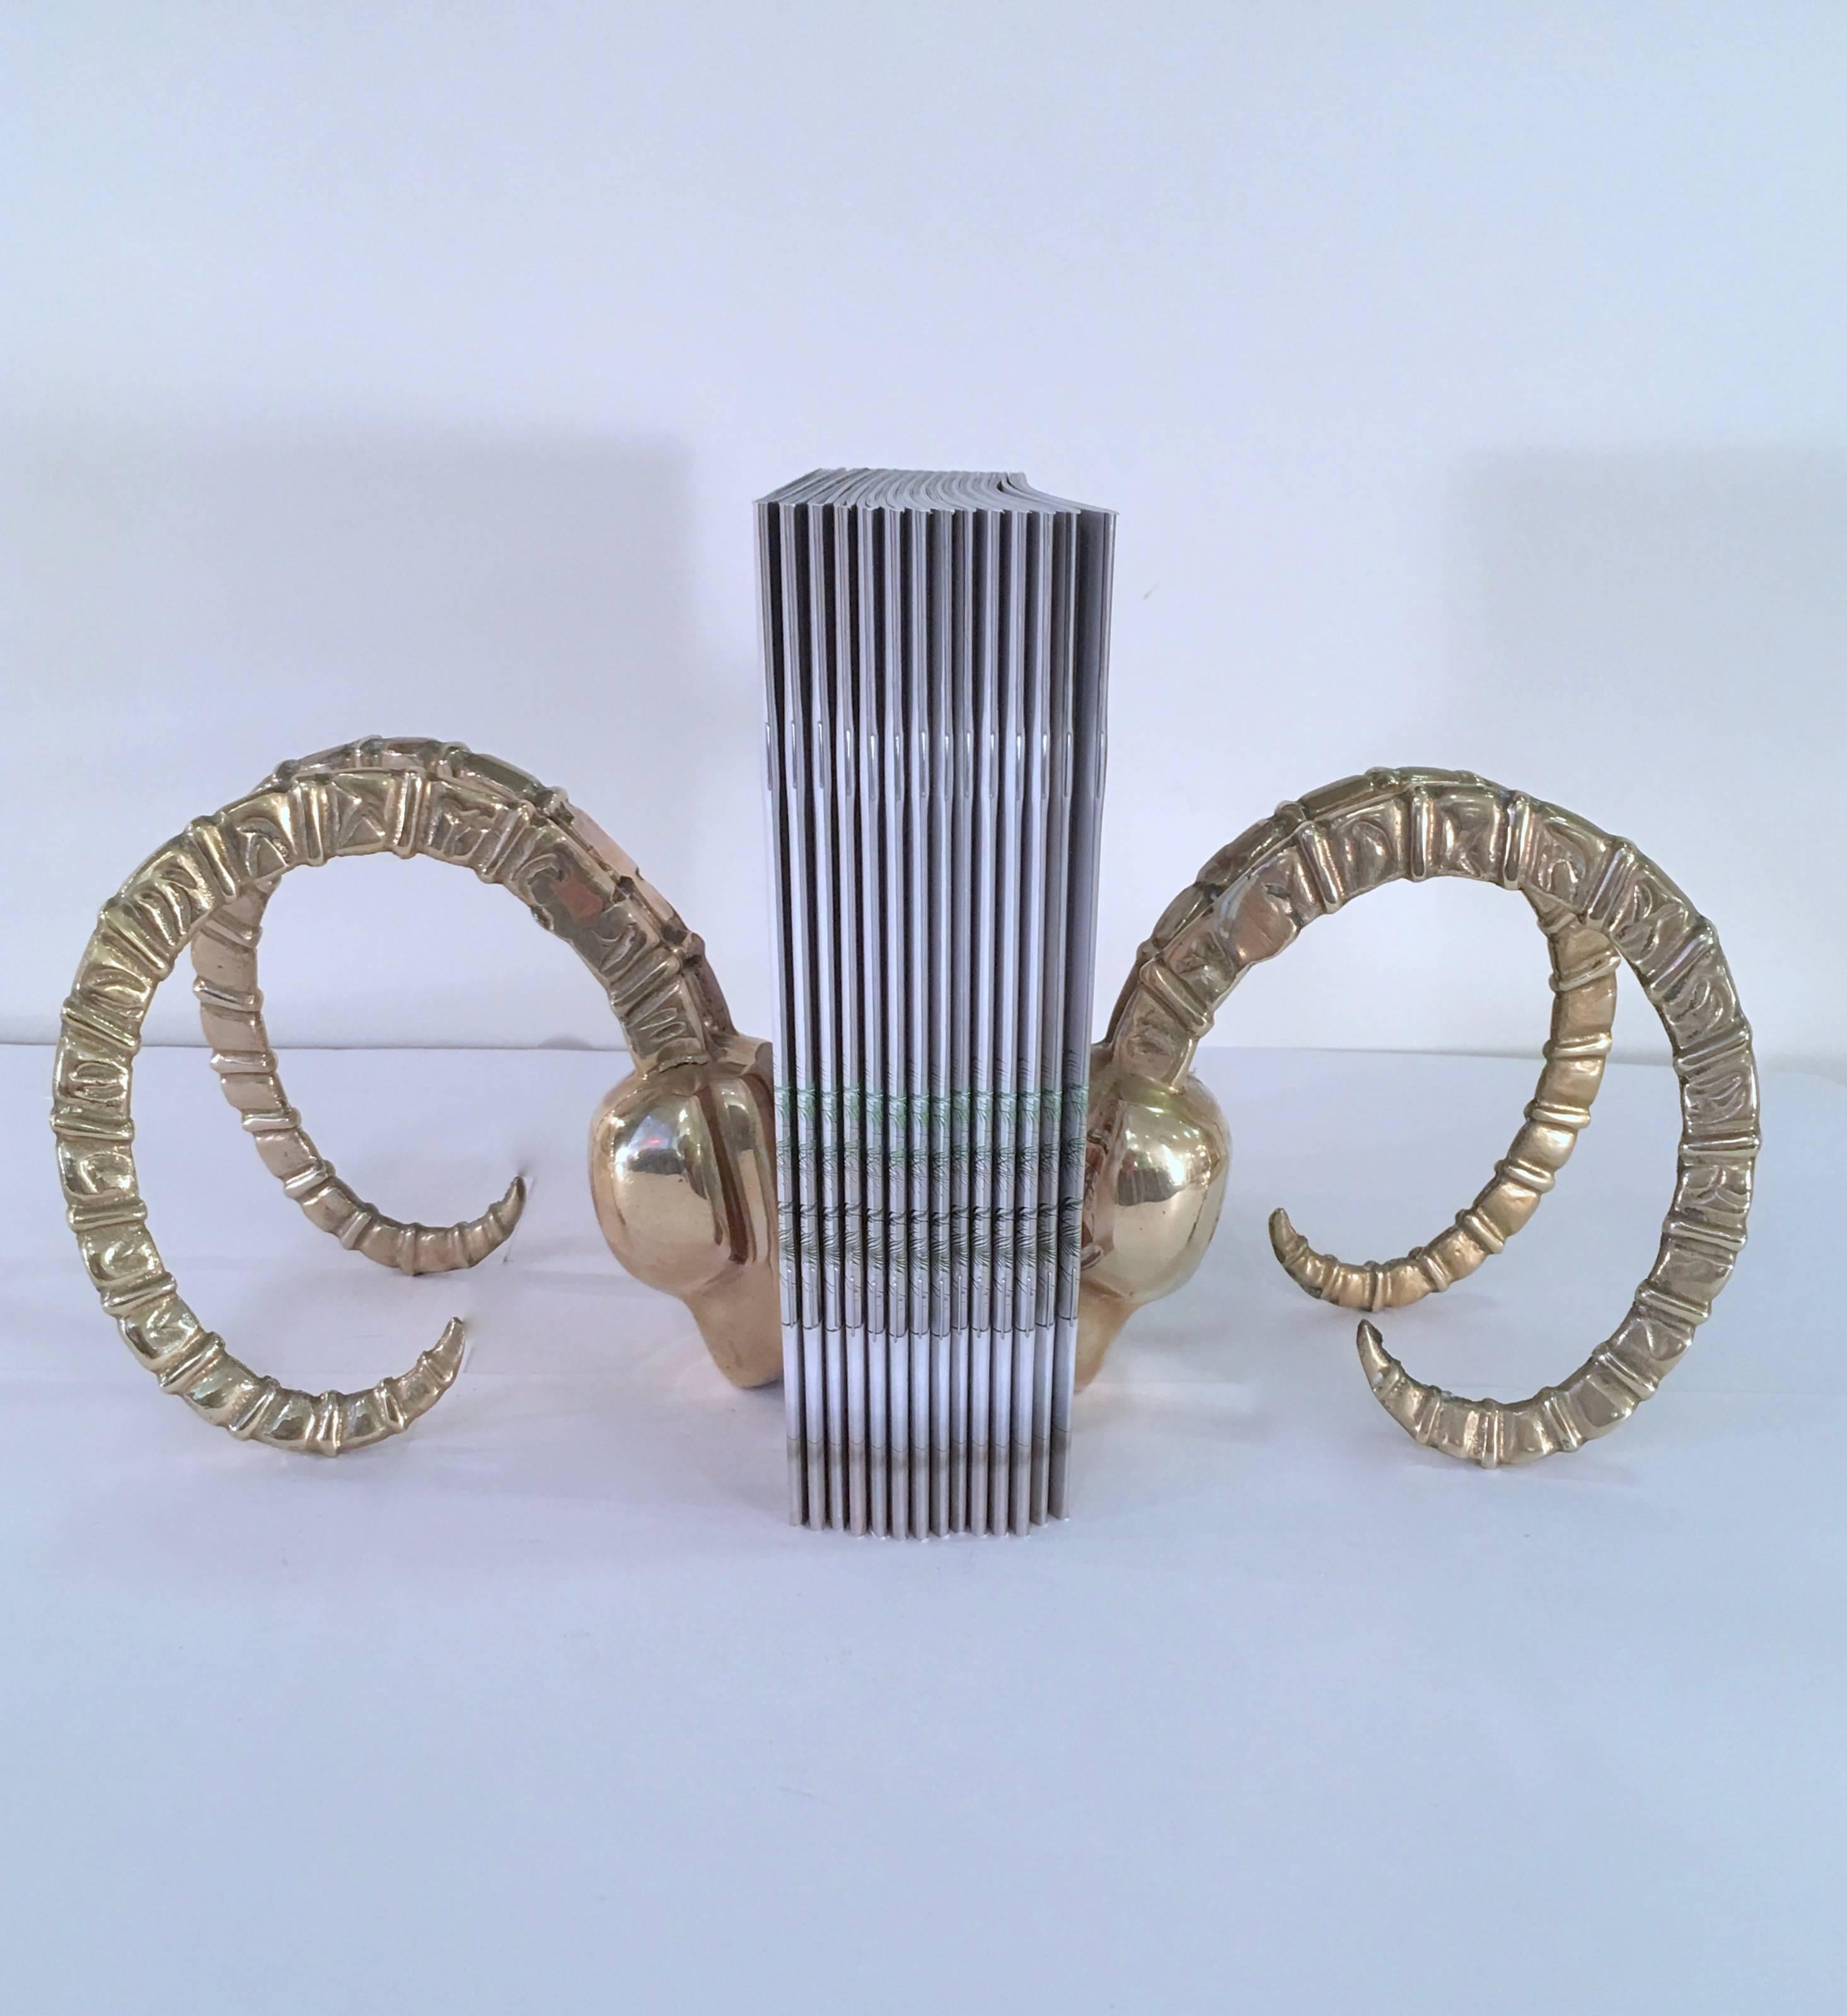 Polished Pair of Brass Gazelle Bookends by Dolbi Cashier